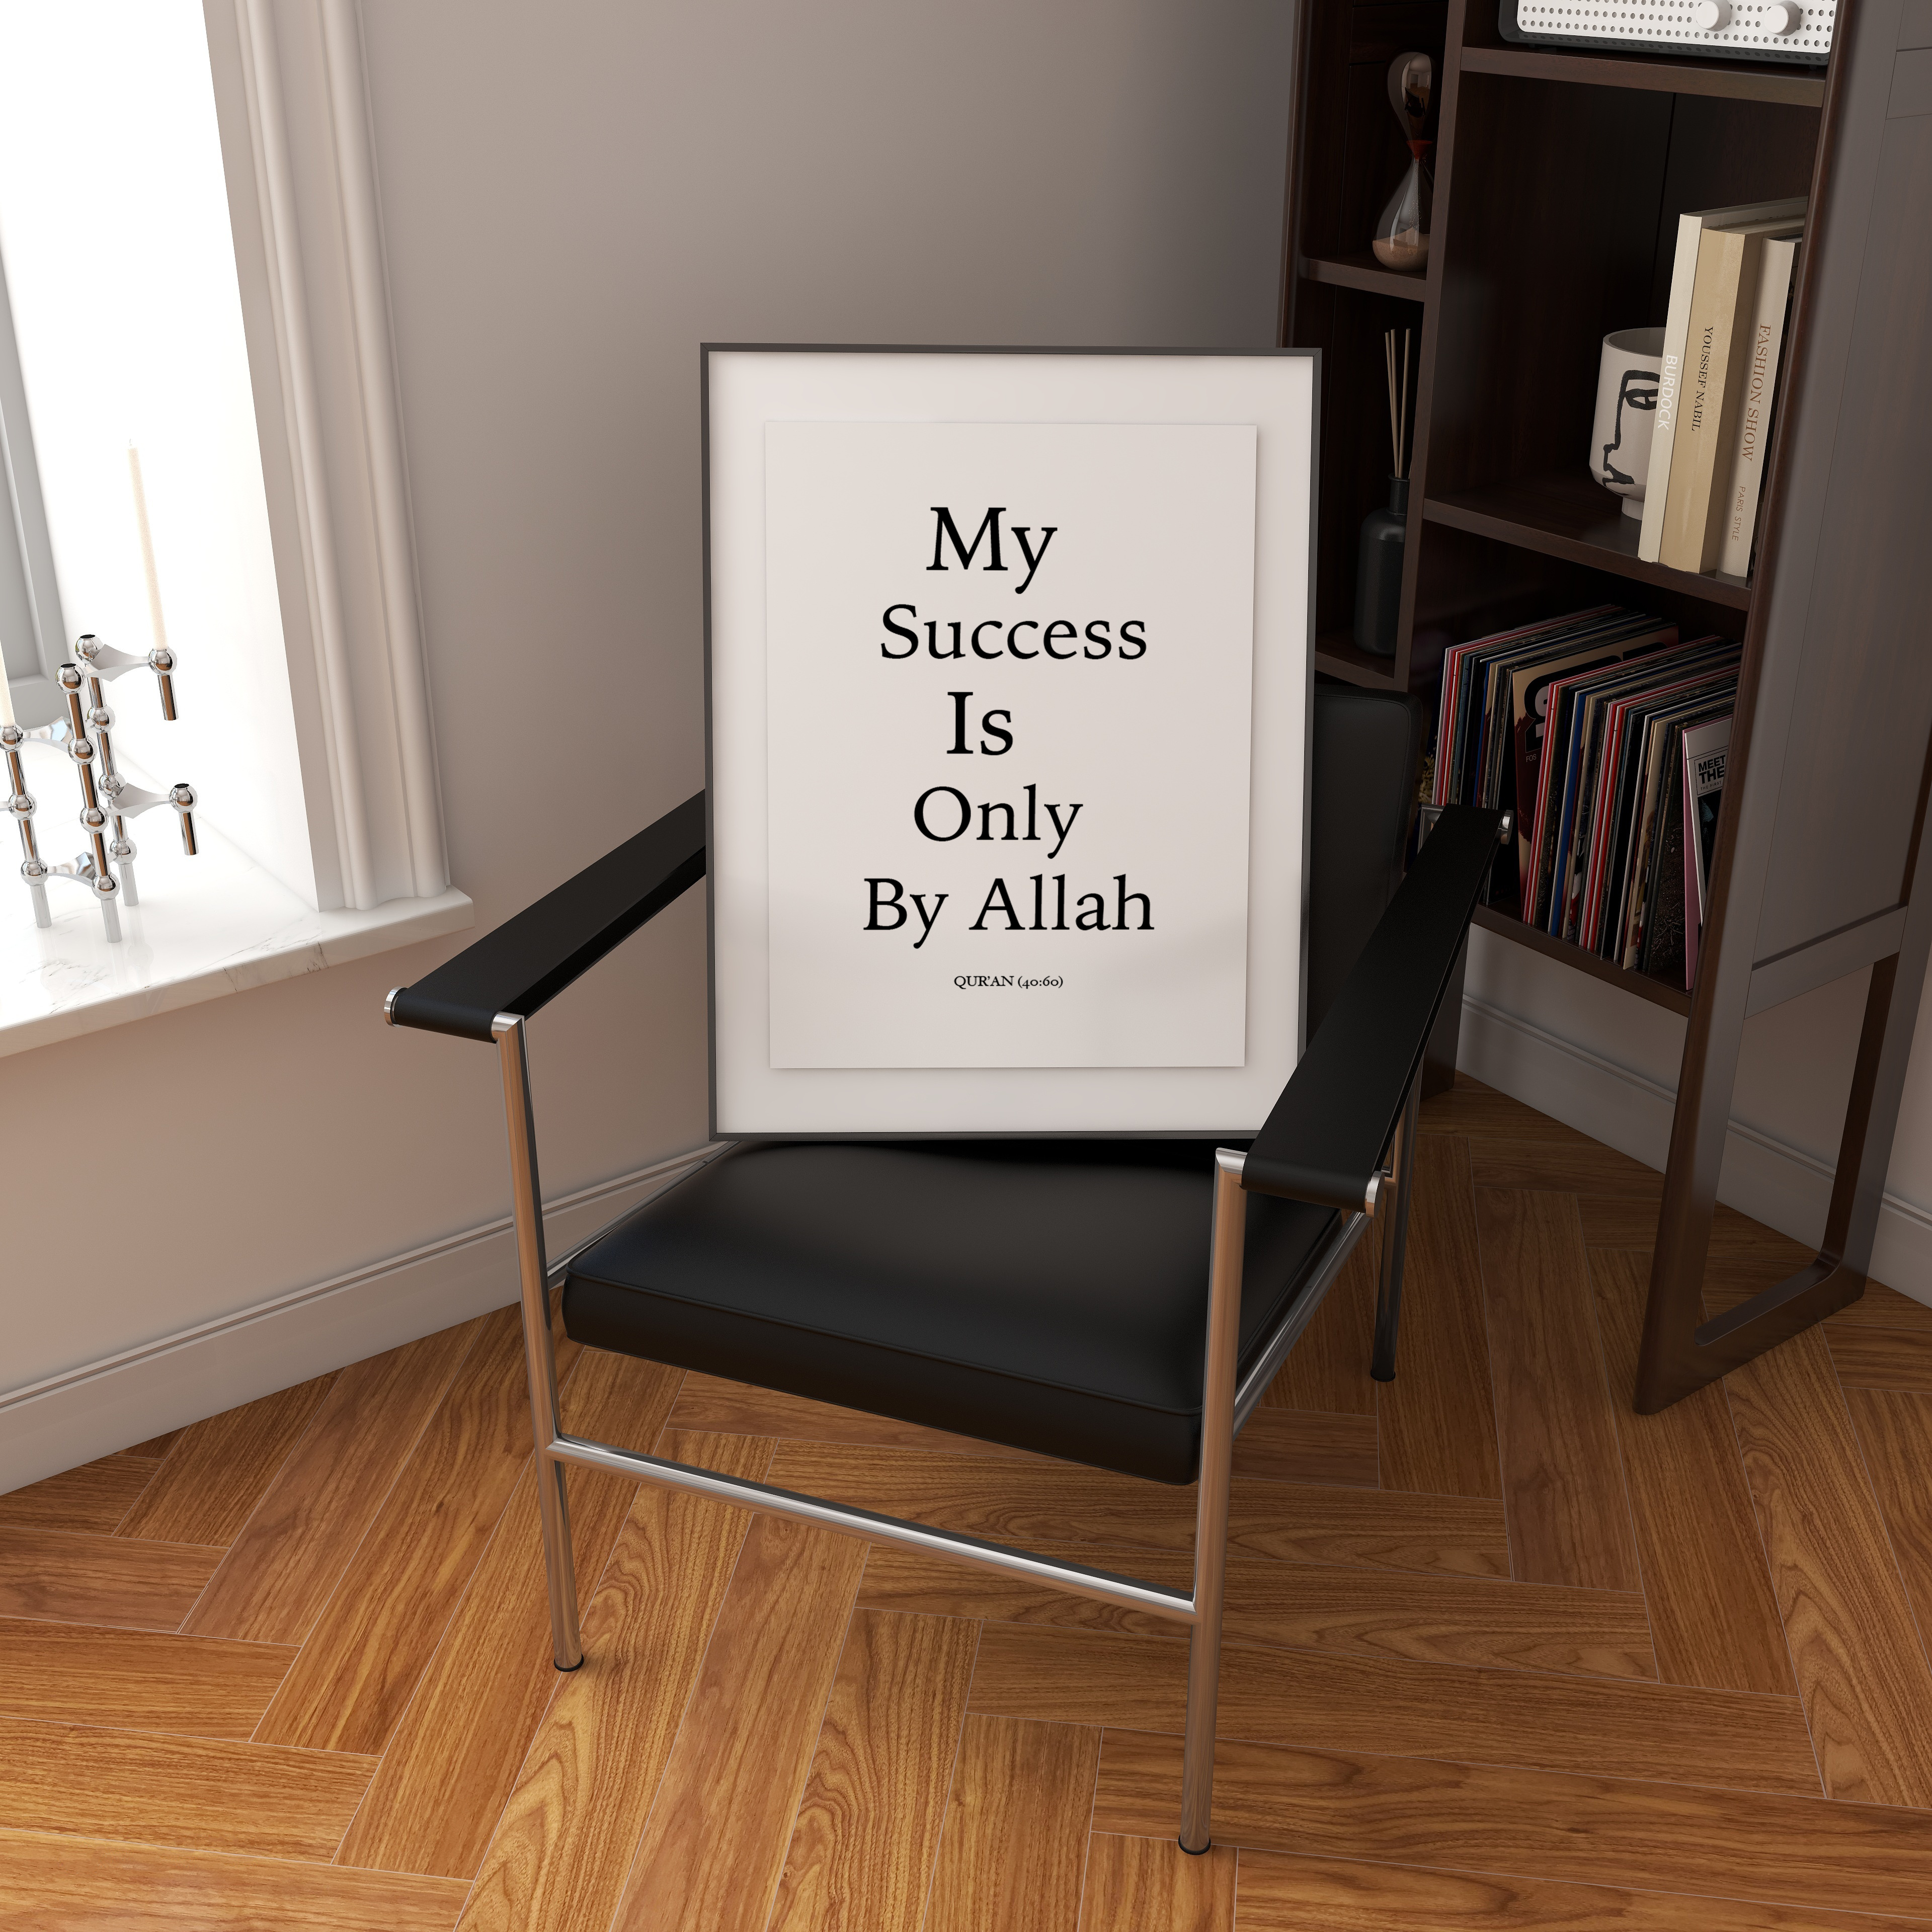 Islamic Wall Art Quote "My Success Is Only By Allah" - Islamic Wall Art Print | Home Decor | Islamic Gifts for Muslims